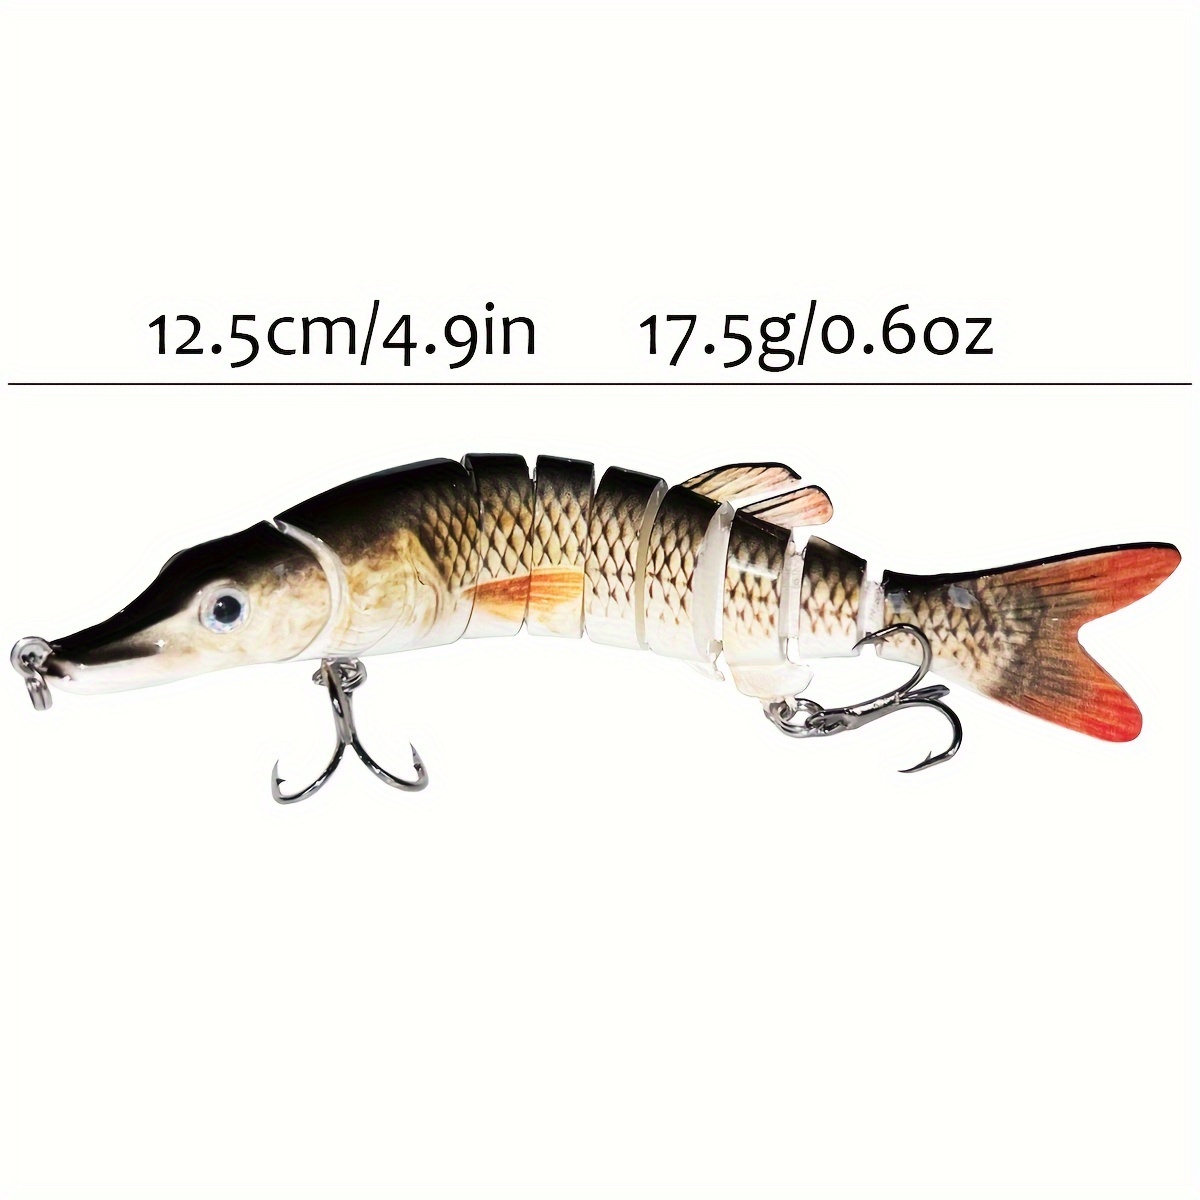 Fishing Lures For Bass Trout, Multi Jointed Swimbaits, Lifelike Fishing  Lure, Slow Sinking Segmented Bass Fishing Lure For Freshwater Or Saltwater